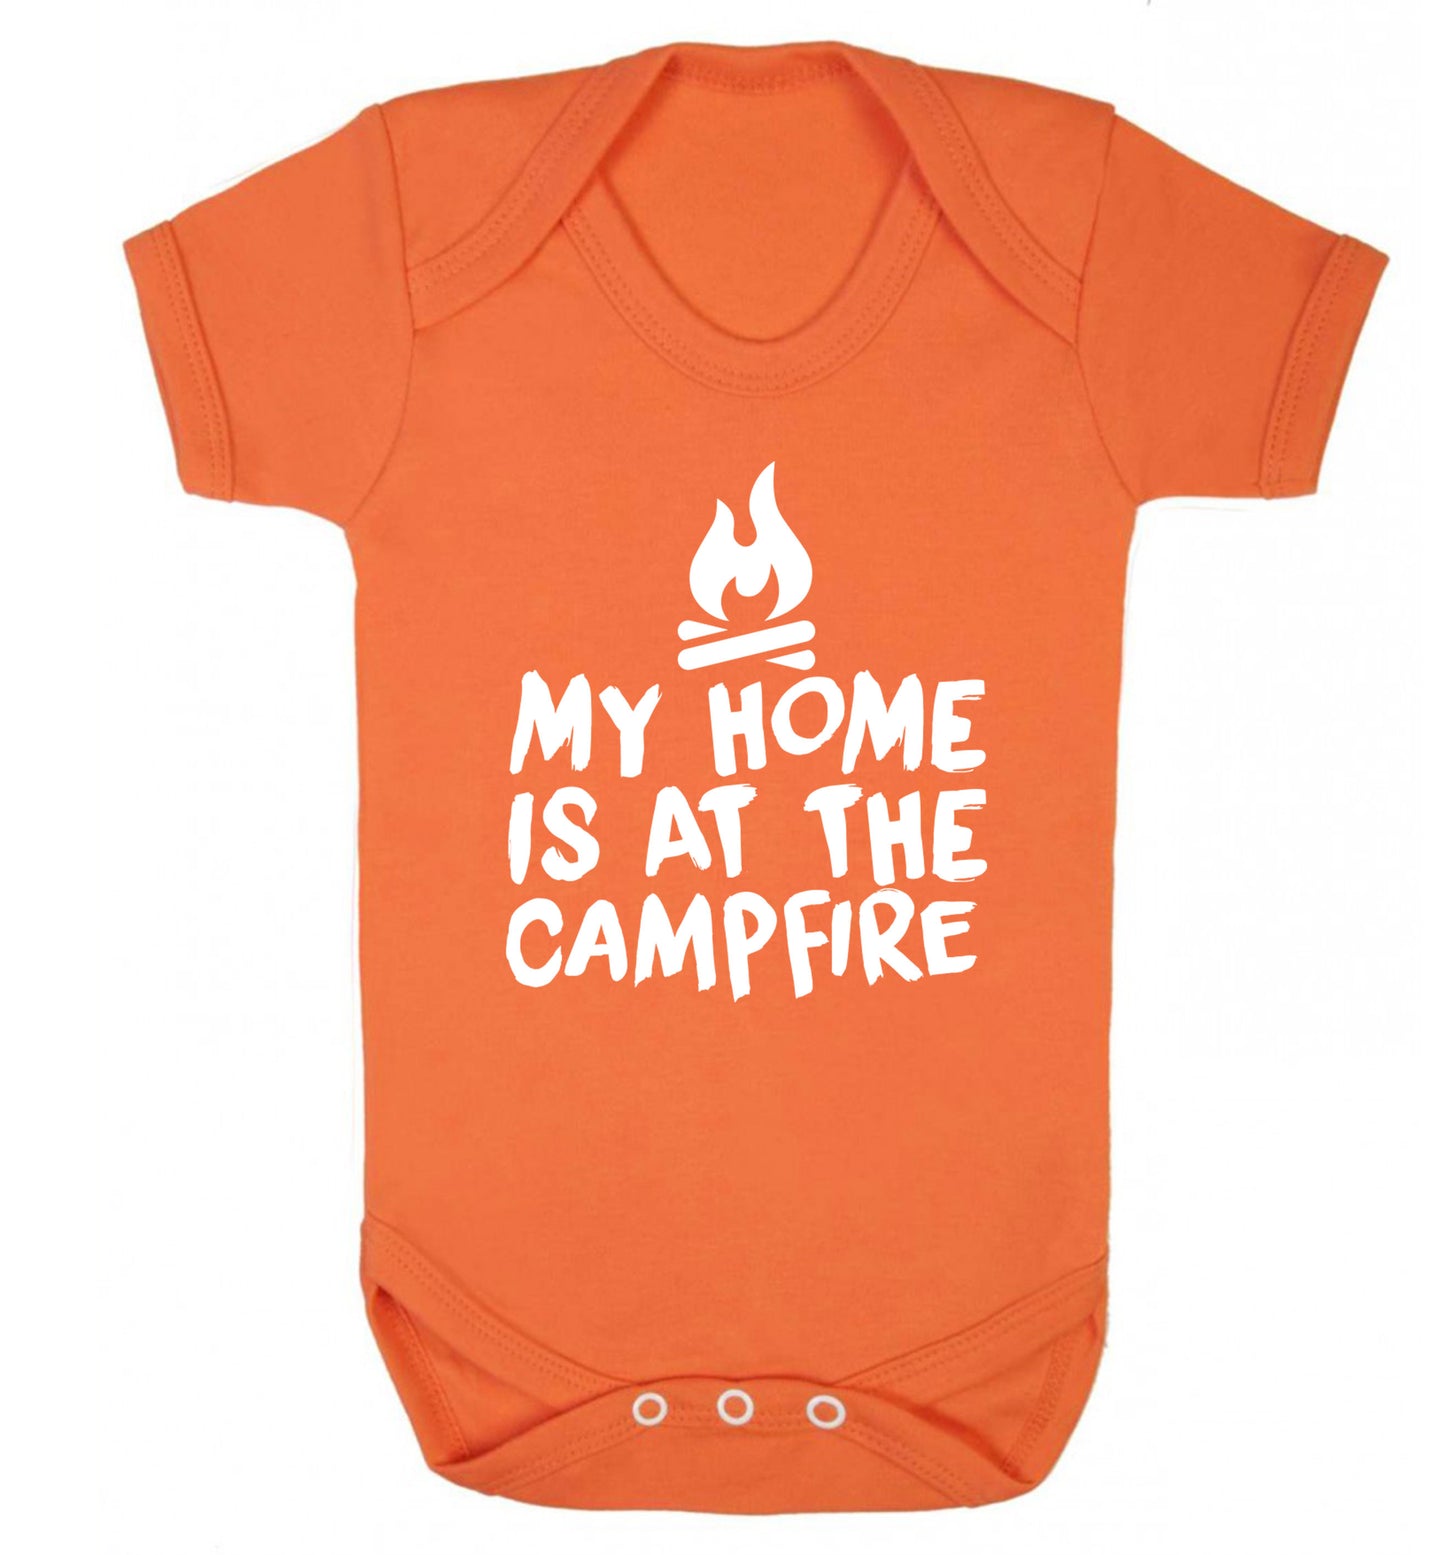 My home is at the campfire Baby Vest orange 18-24 months